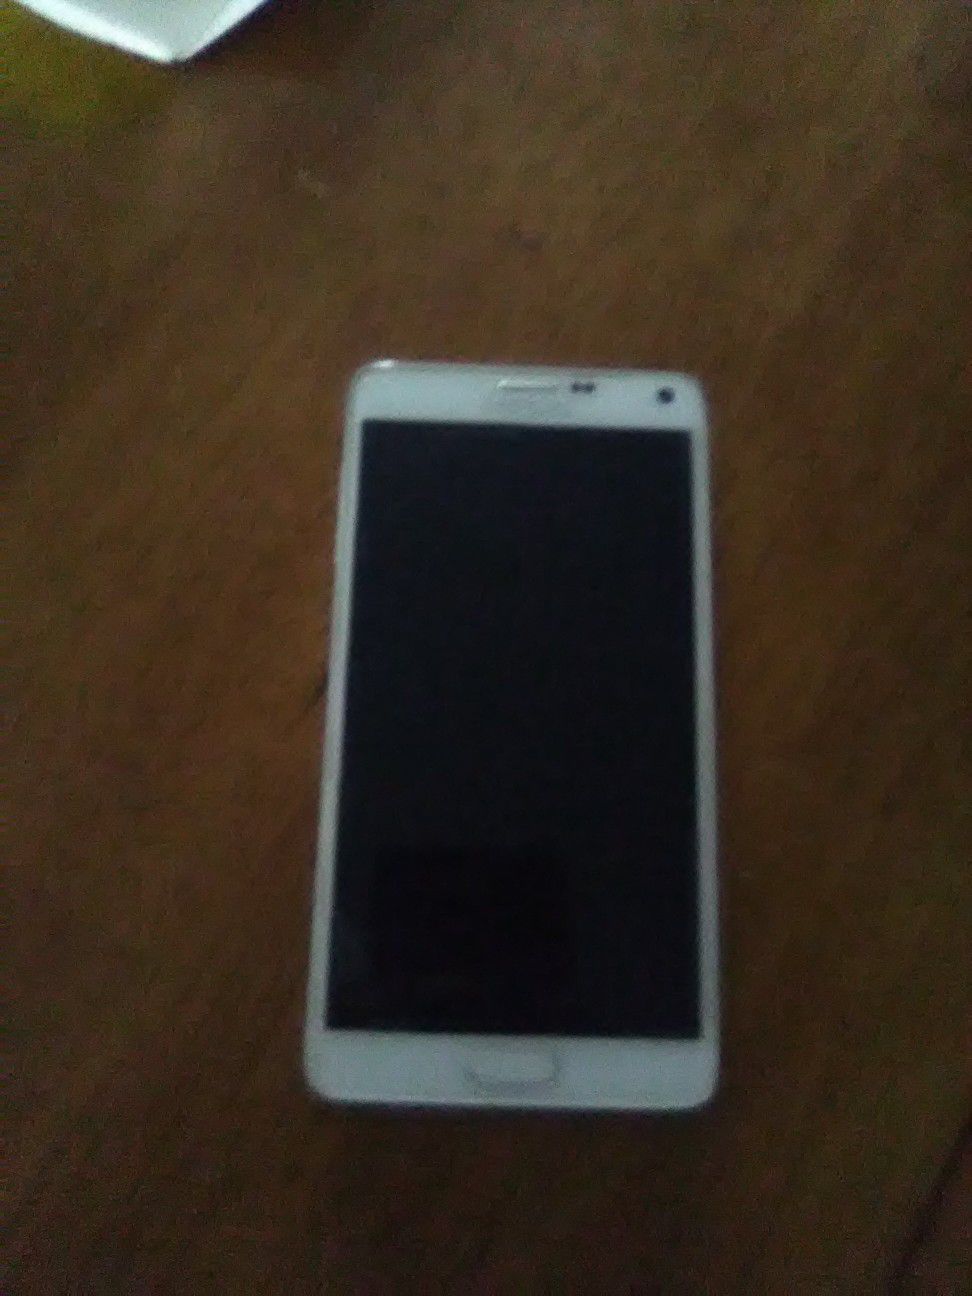 Good working phone in great condition no scratches no cracks Galaxy note 4 Verizon 4G pause all case